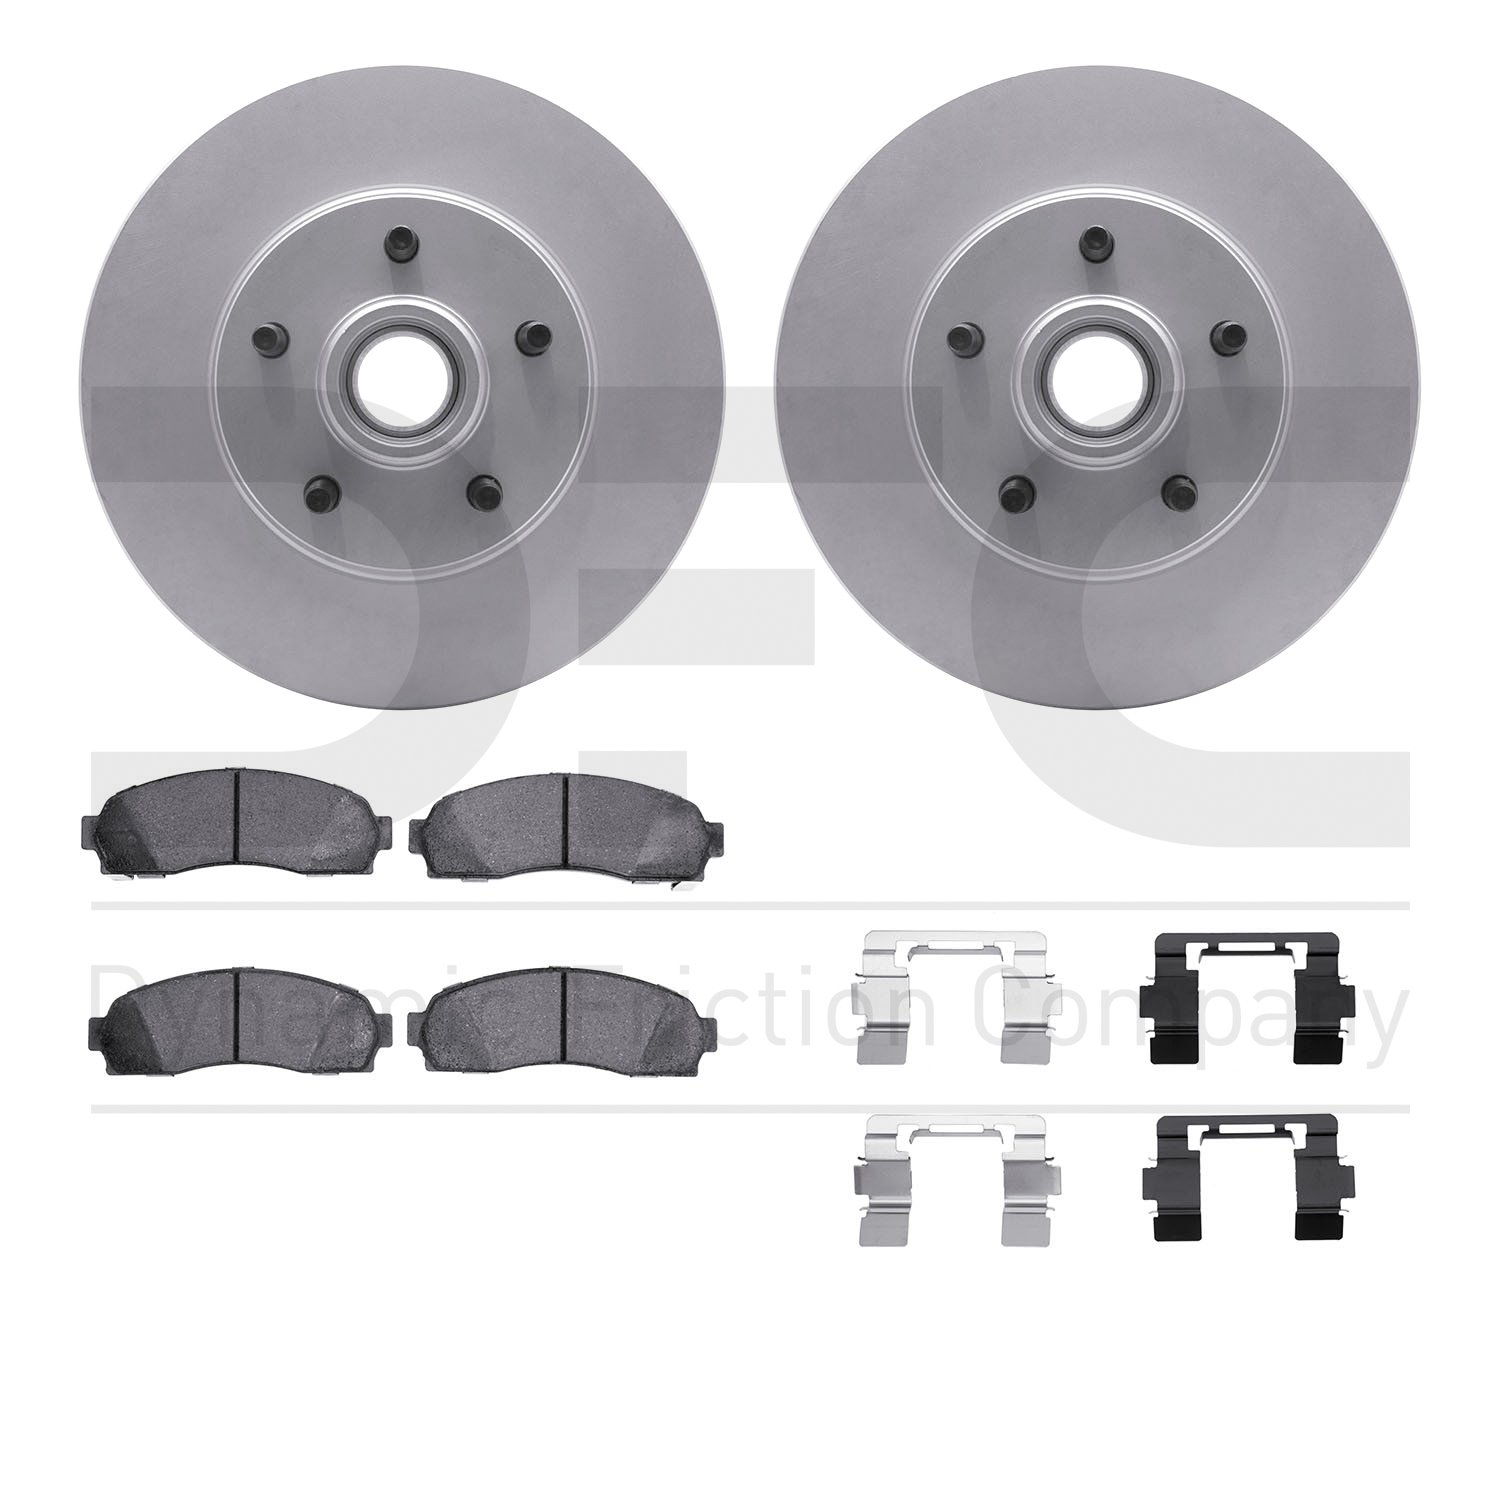 4412-54013 Geospec Brake Rotors with Ultimate-Duty Brake Pads & Hardware, 2003-2011 Ford/Lincoln/Mercury/Mazda, Position: Front